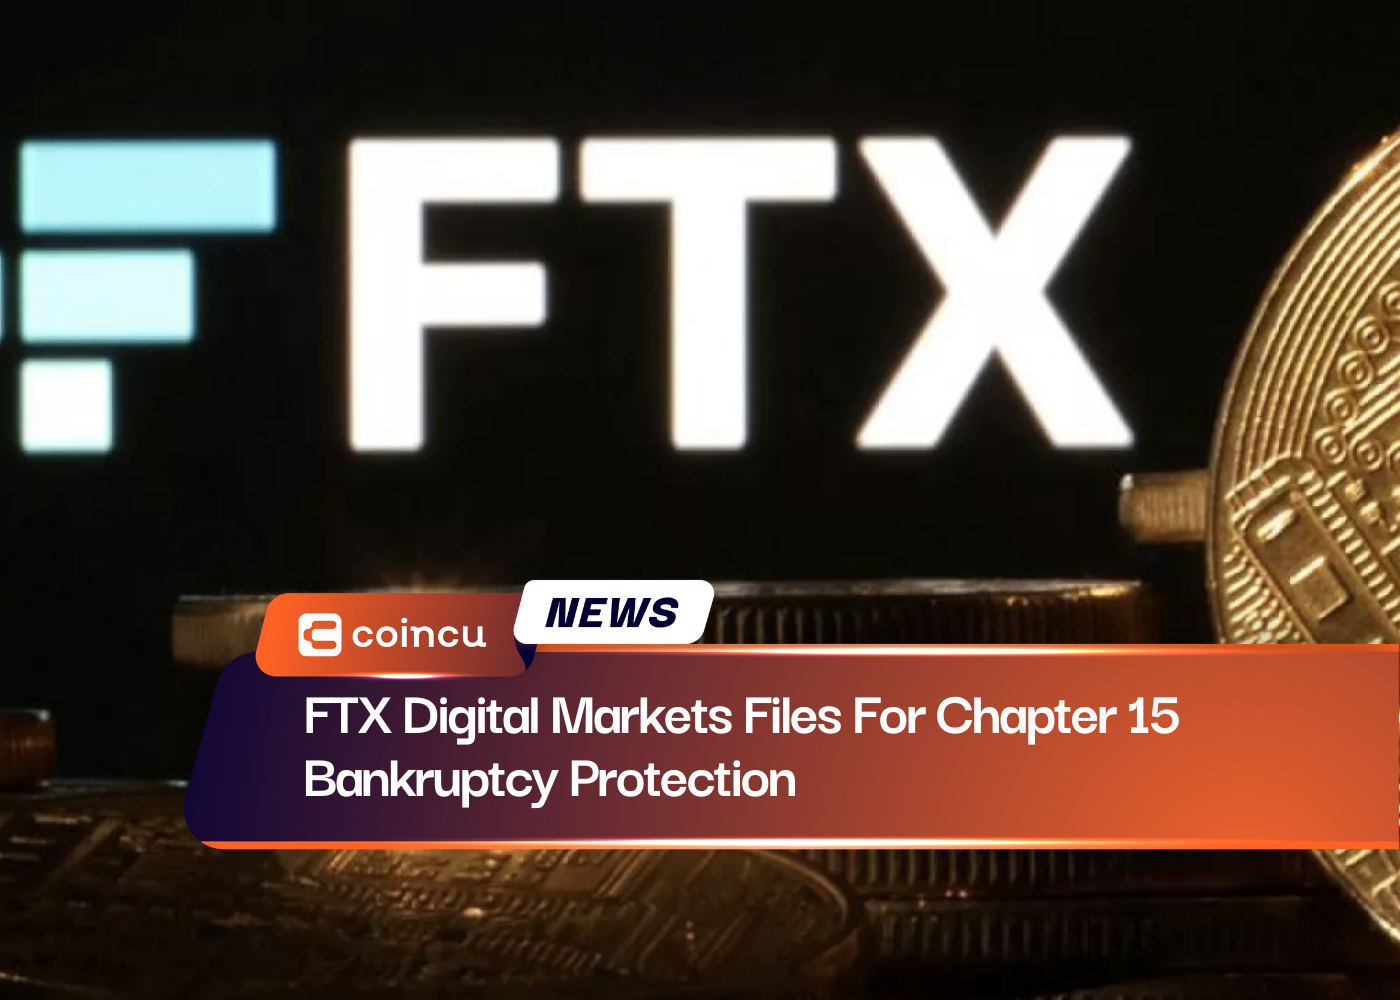 FTX Digital Markets Files For Chapter 15 Bankruptcy Protection